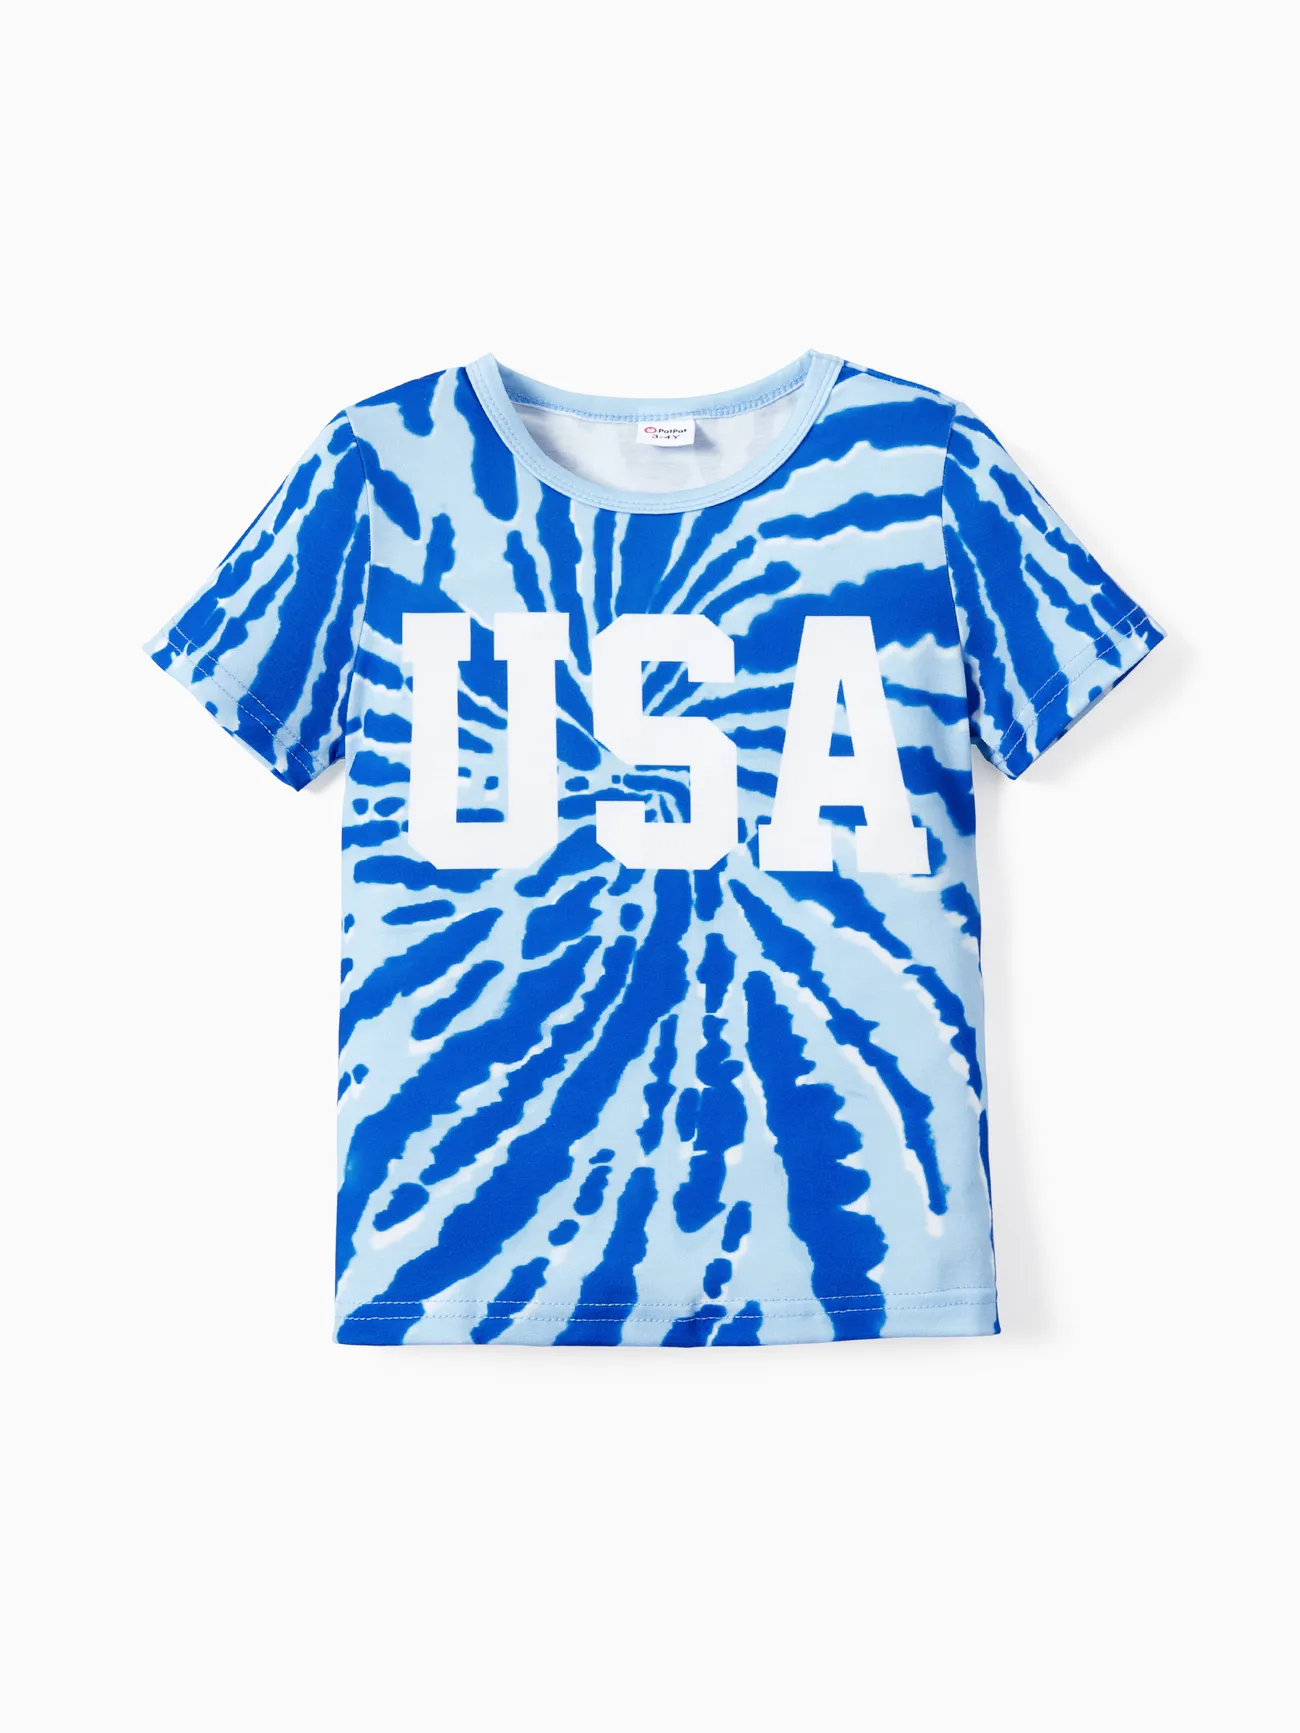 Independence Day Family Matching Tie-Dye Print USA Short Sleeves Letter Top Colorful big image 1